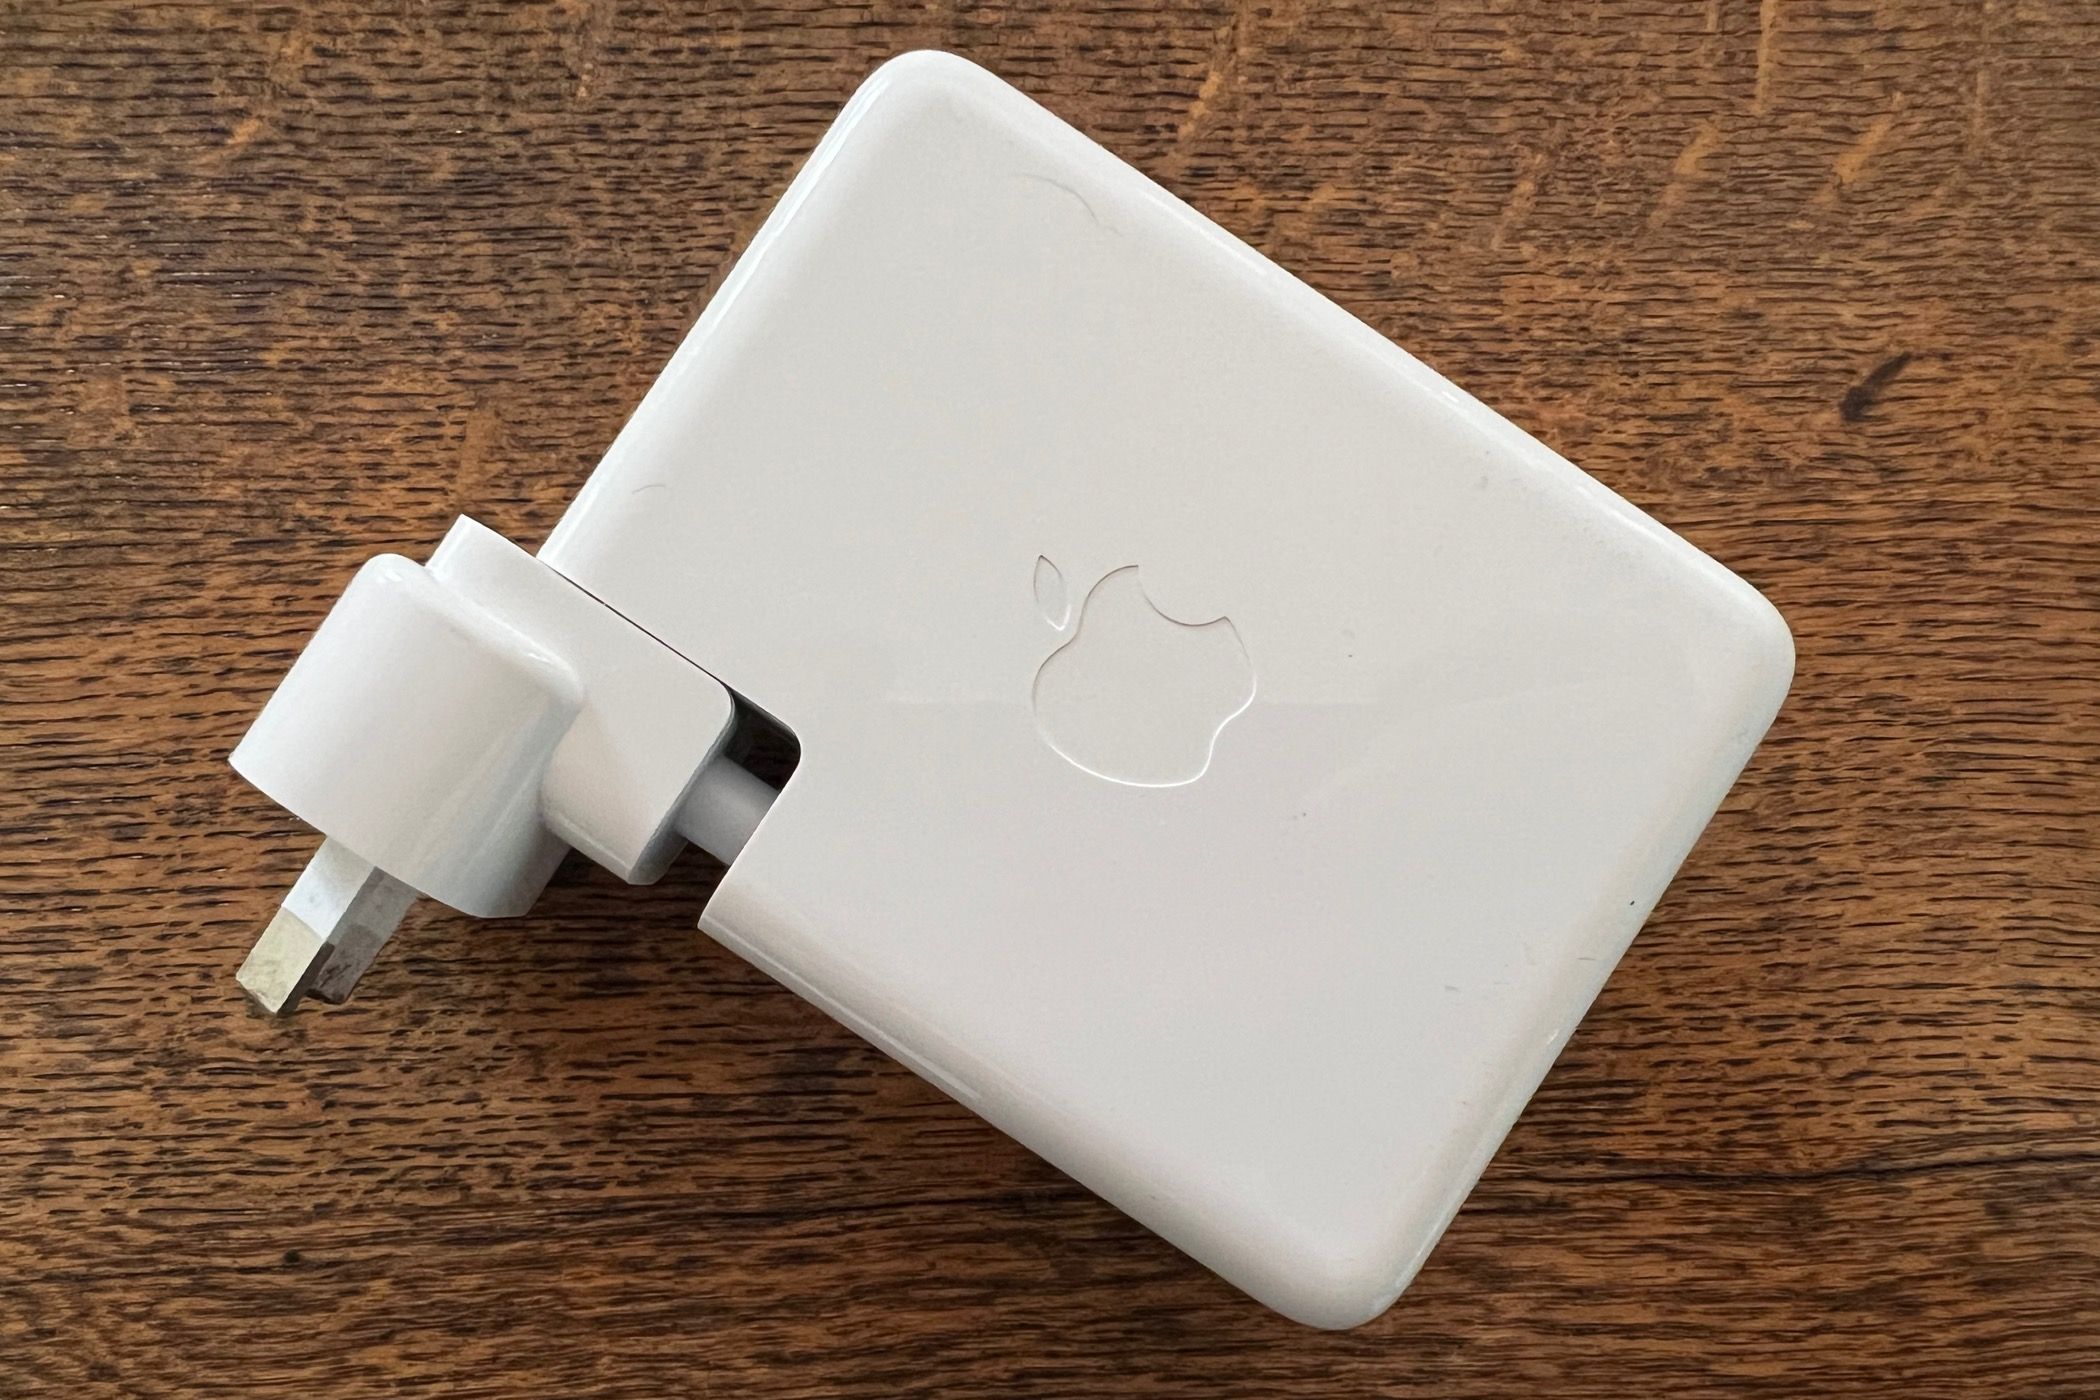 A MacBook adapter with a slipped plug